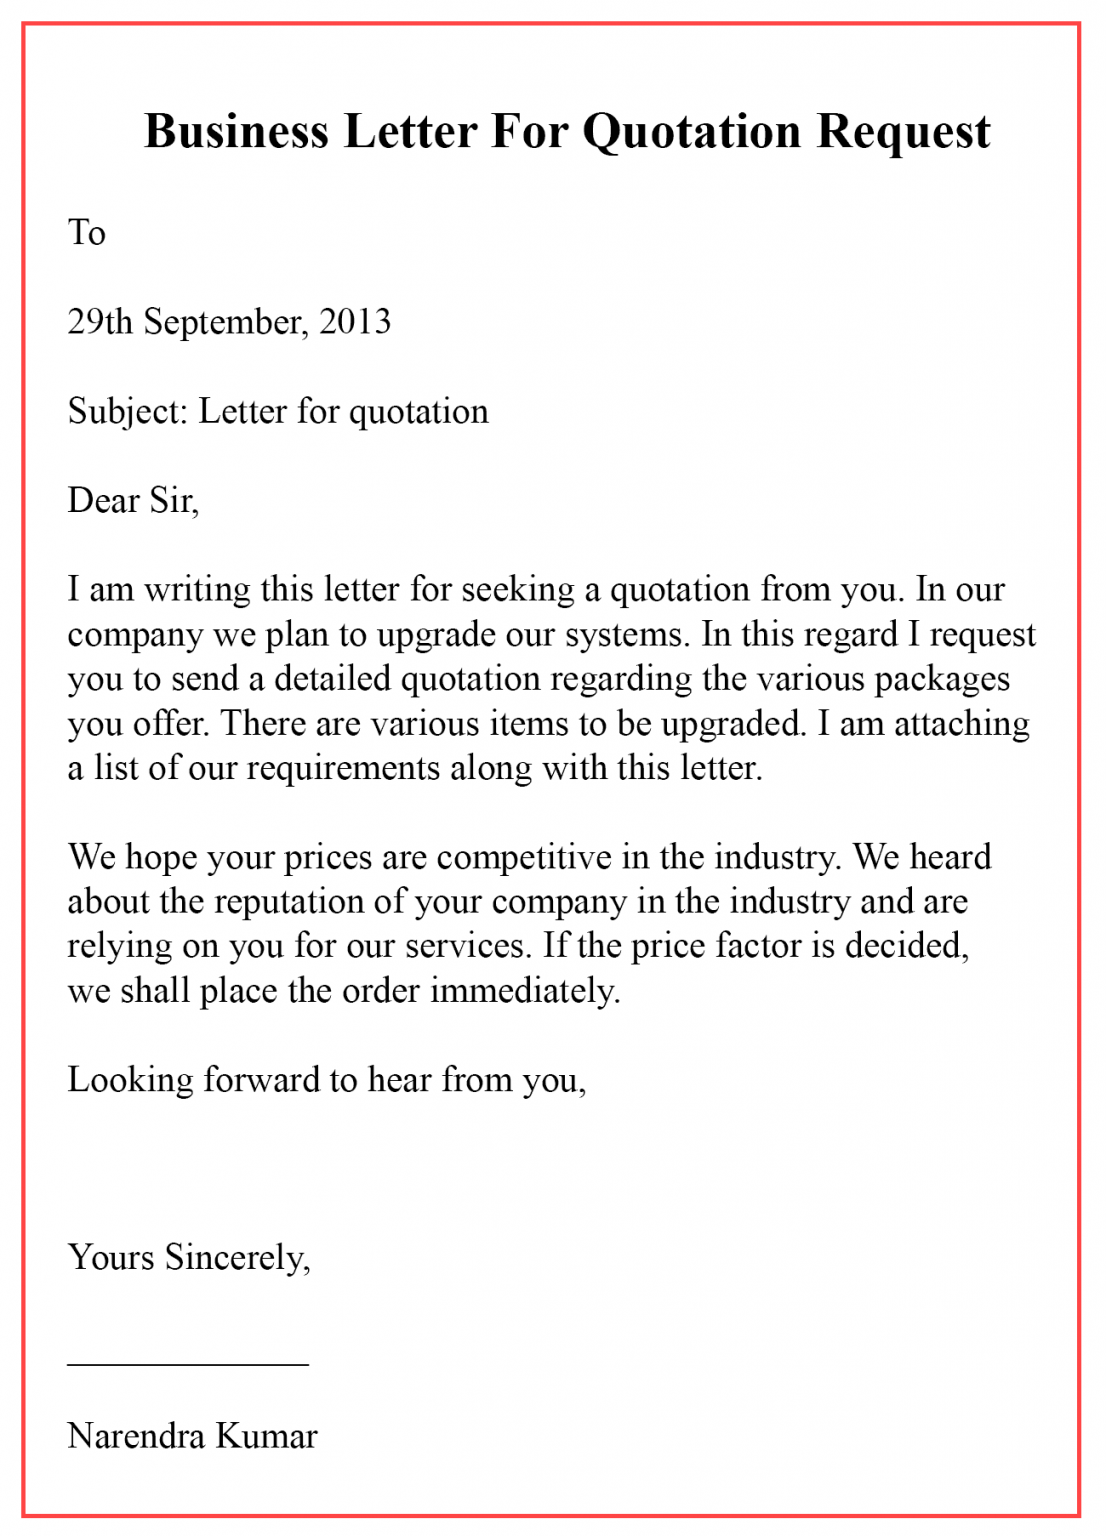 request for quotation cover letter